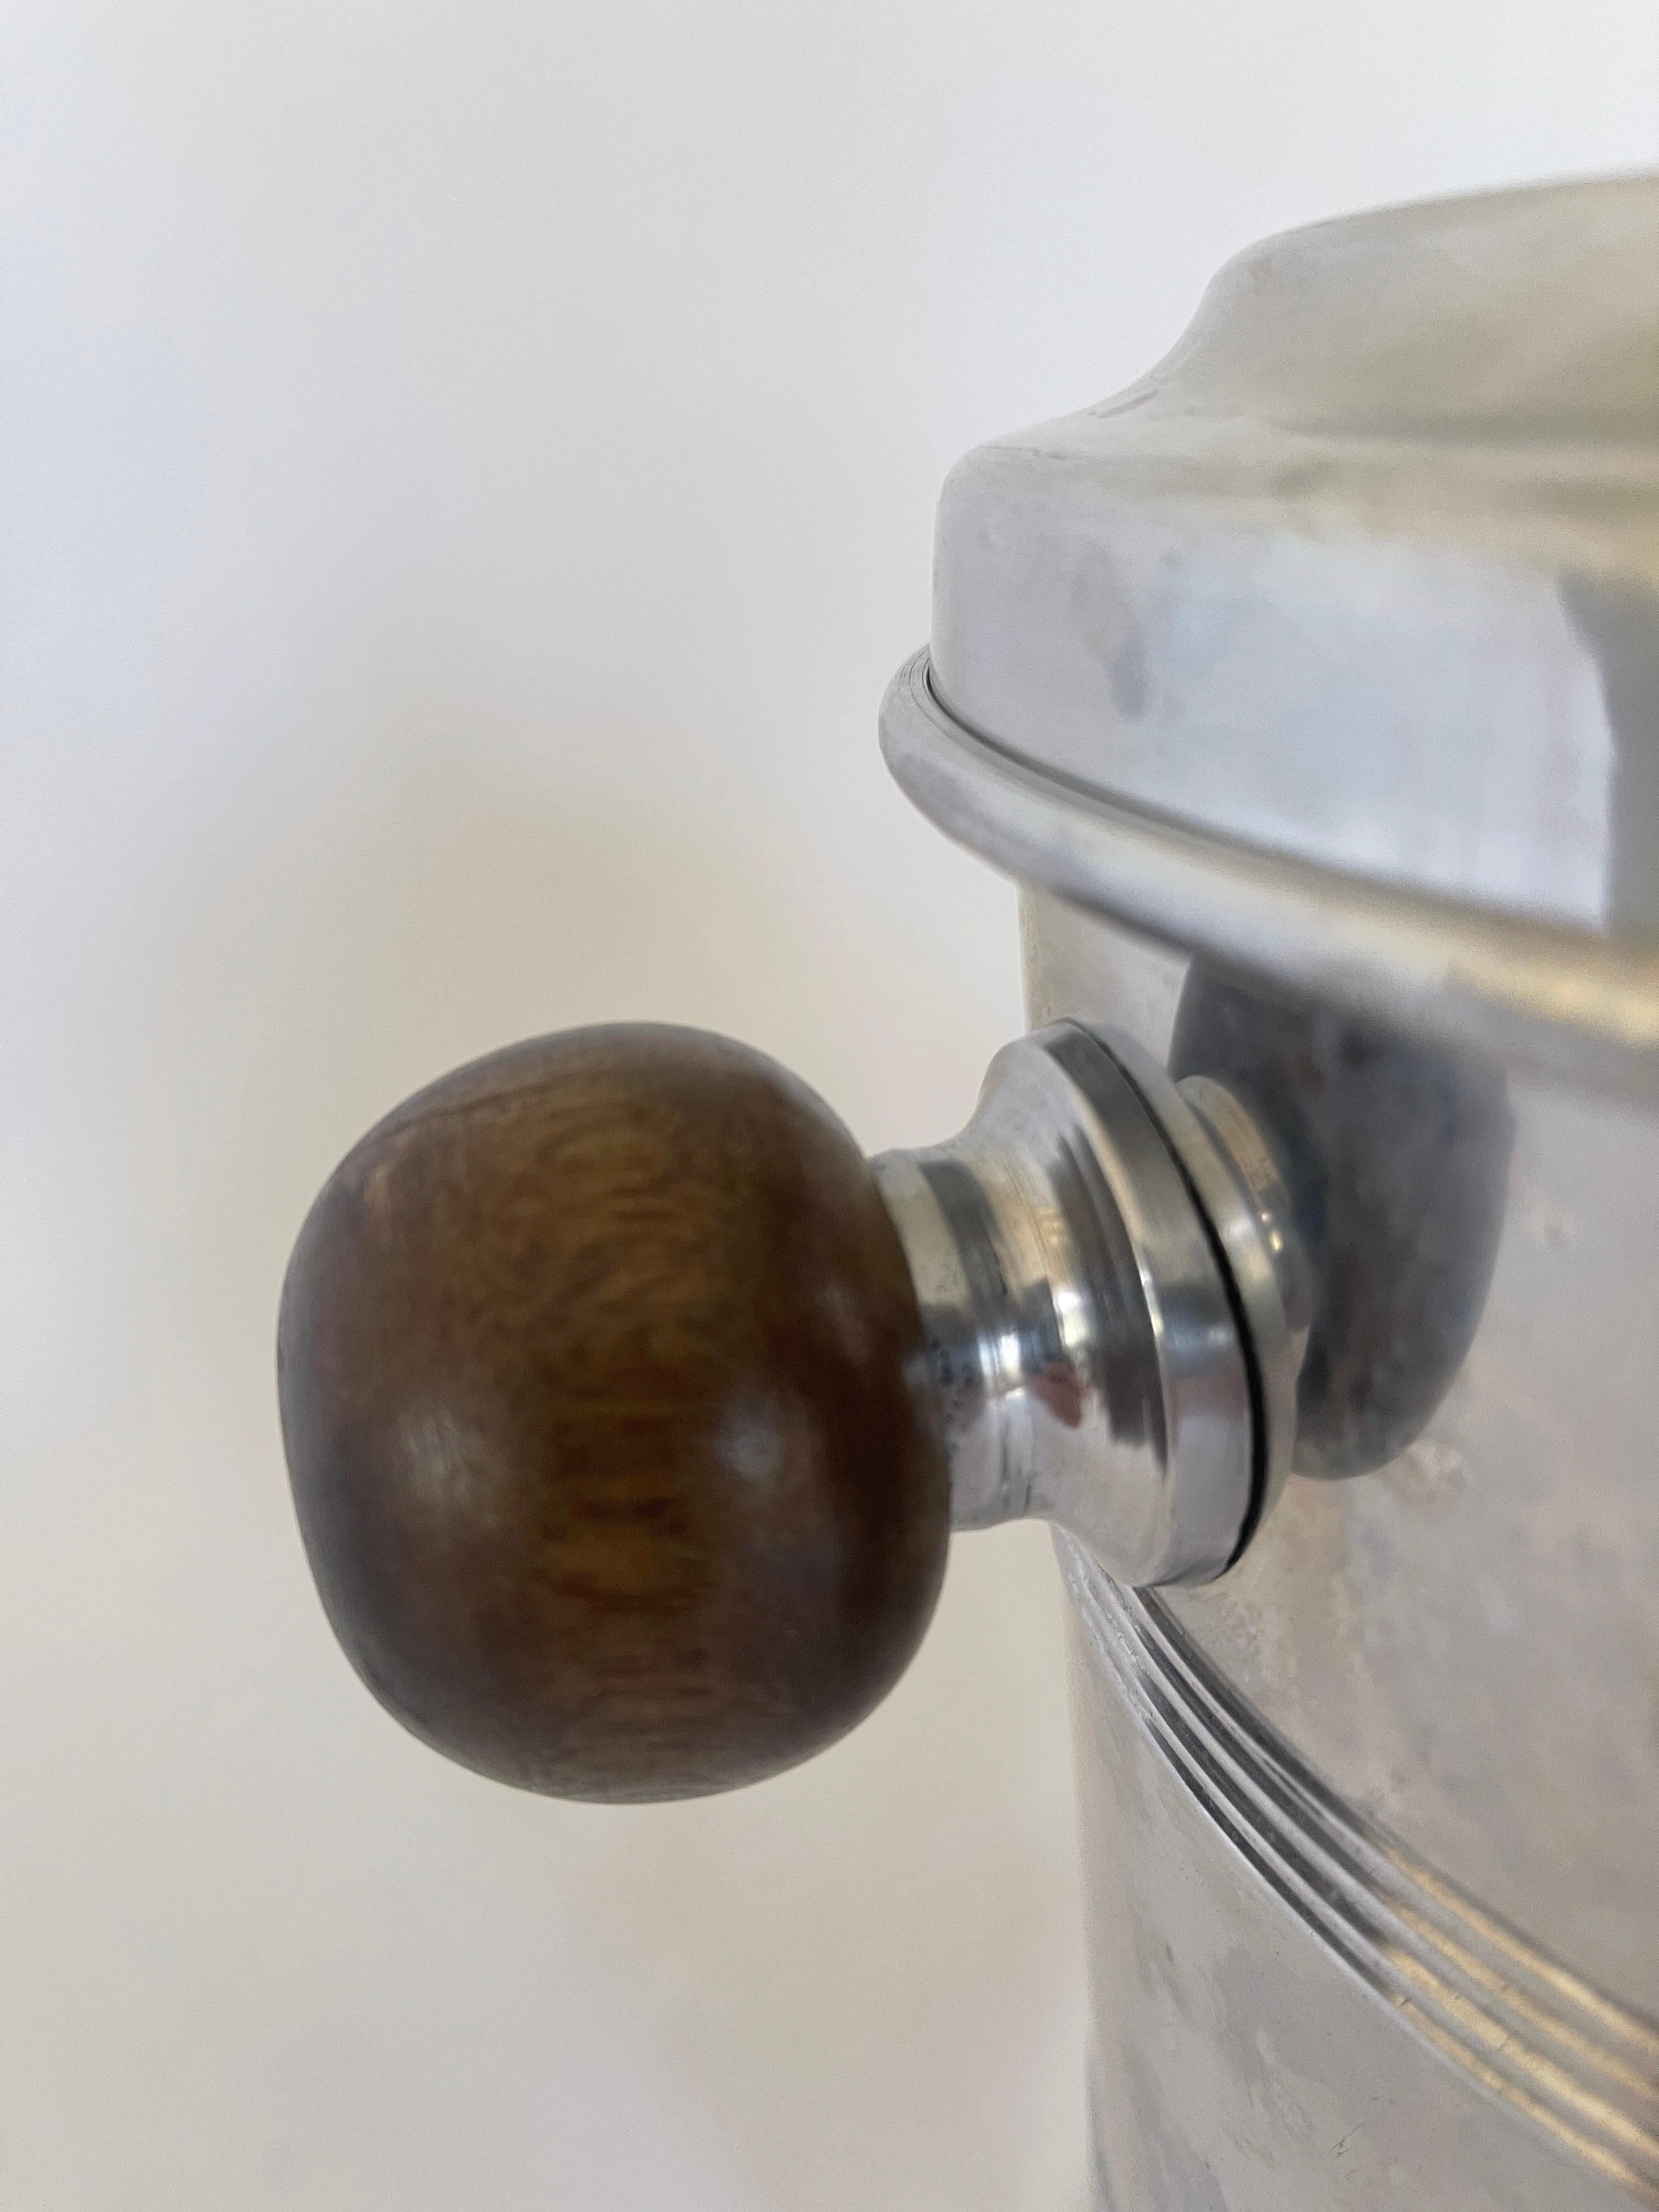 French 1970's circular aluminum ice bucket with covered top, adorned with walnut sphere and two walnut sphere handles.
Measurements with lid : 11